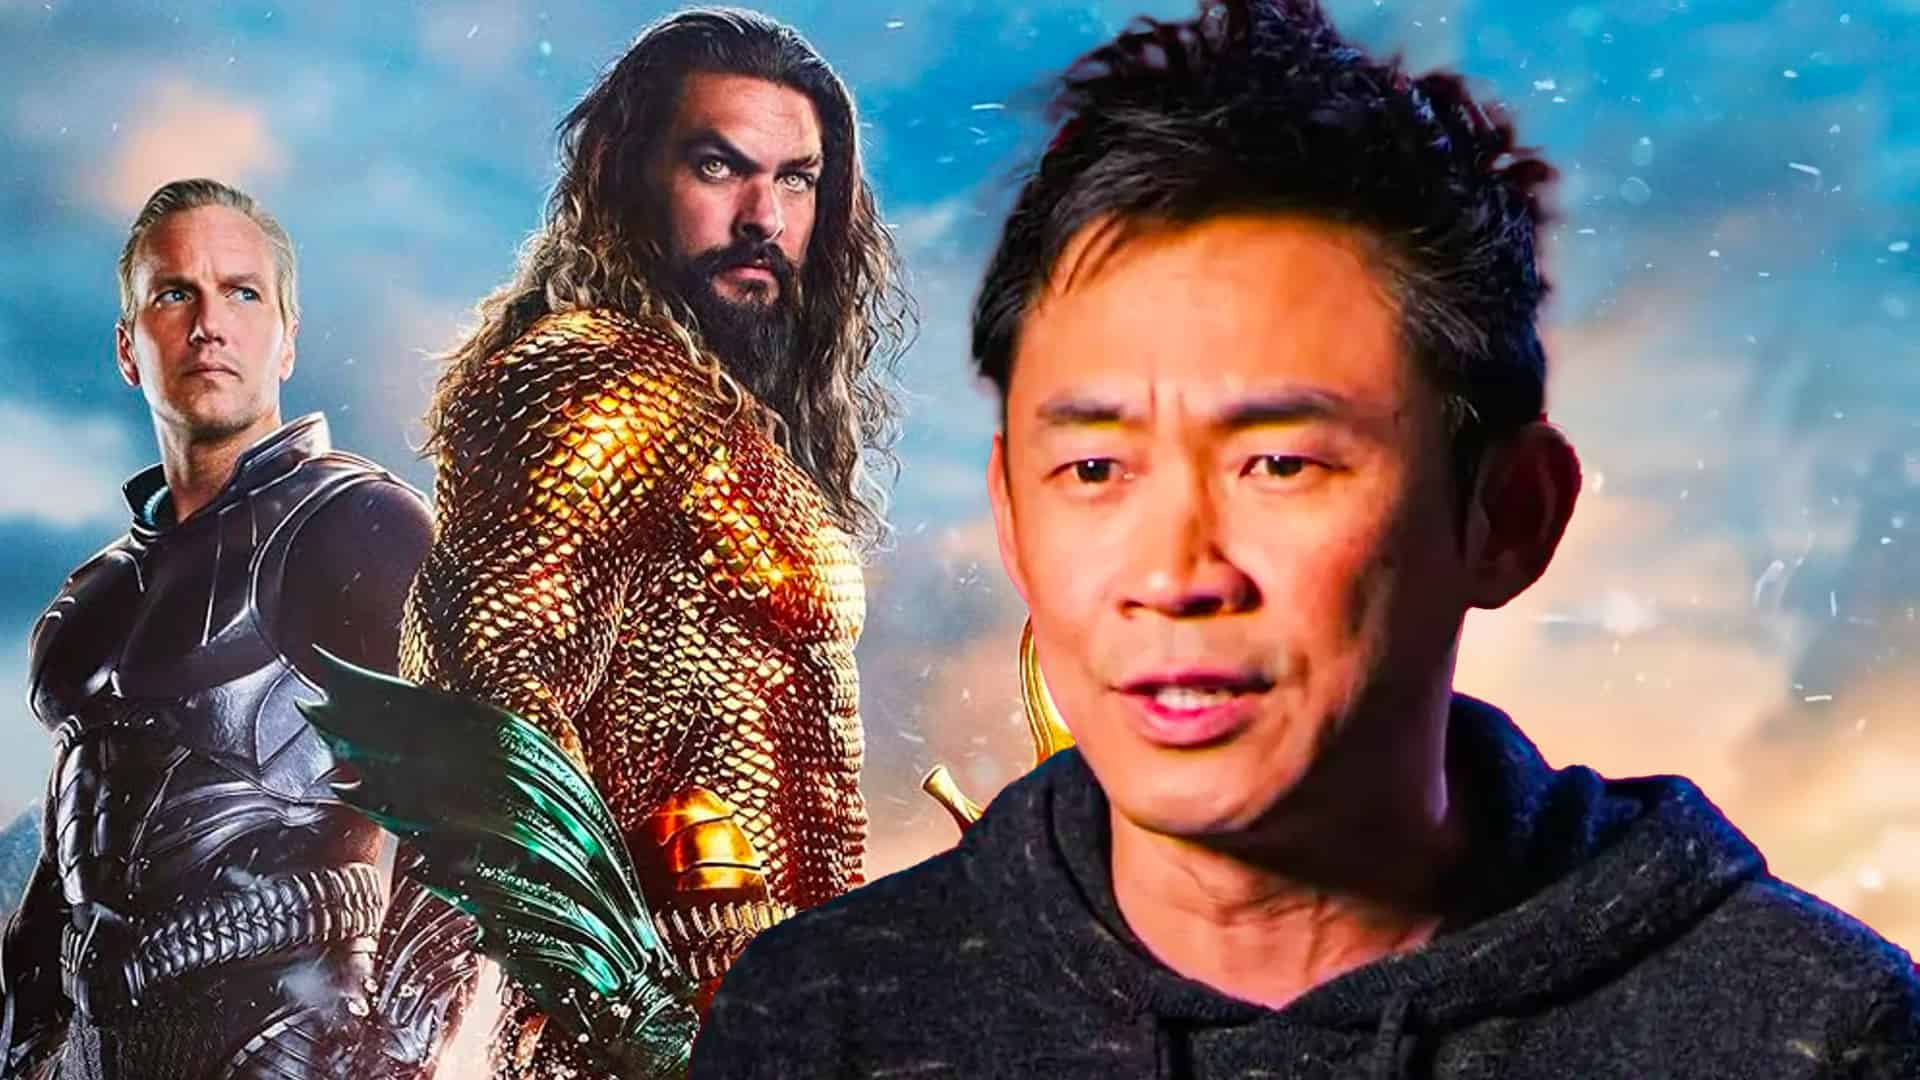 Aquaman 2' Trailer Controversy and Fan Concerns, Explained